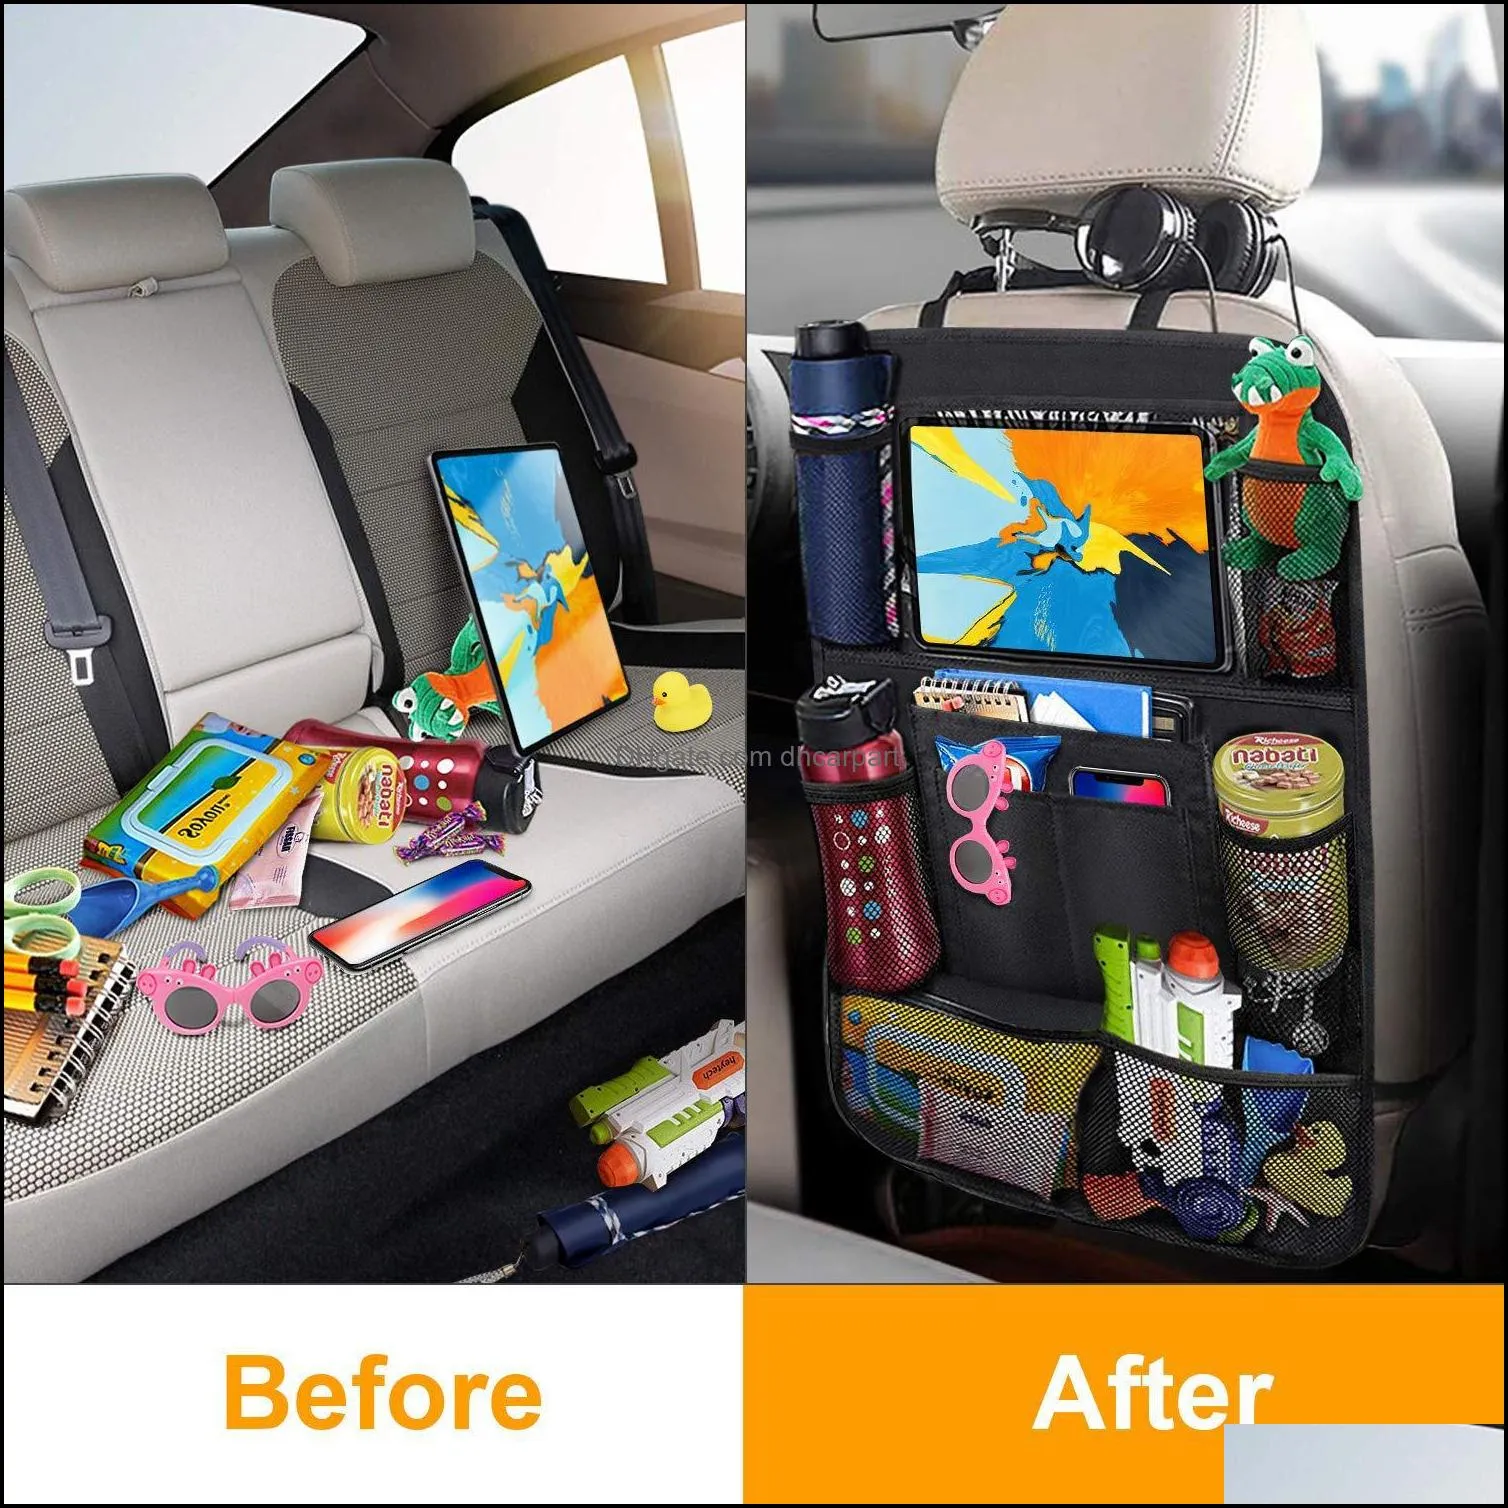 2pcs car seat back organizer 9 storage pockets with touch screen tablet holder protector for kids children accessories